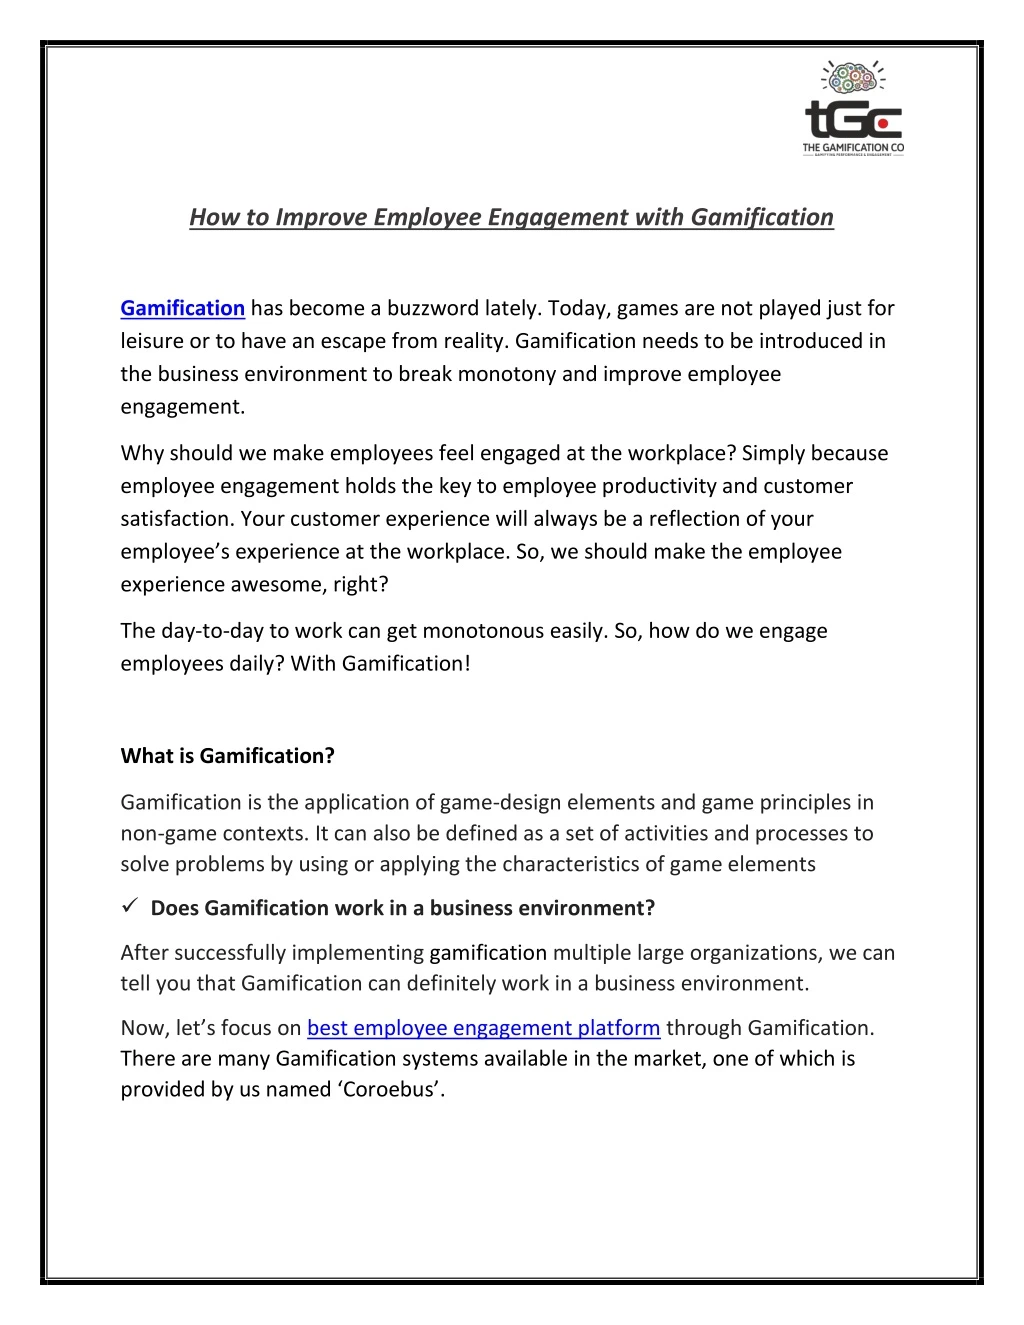 how to improve employee engagement with